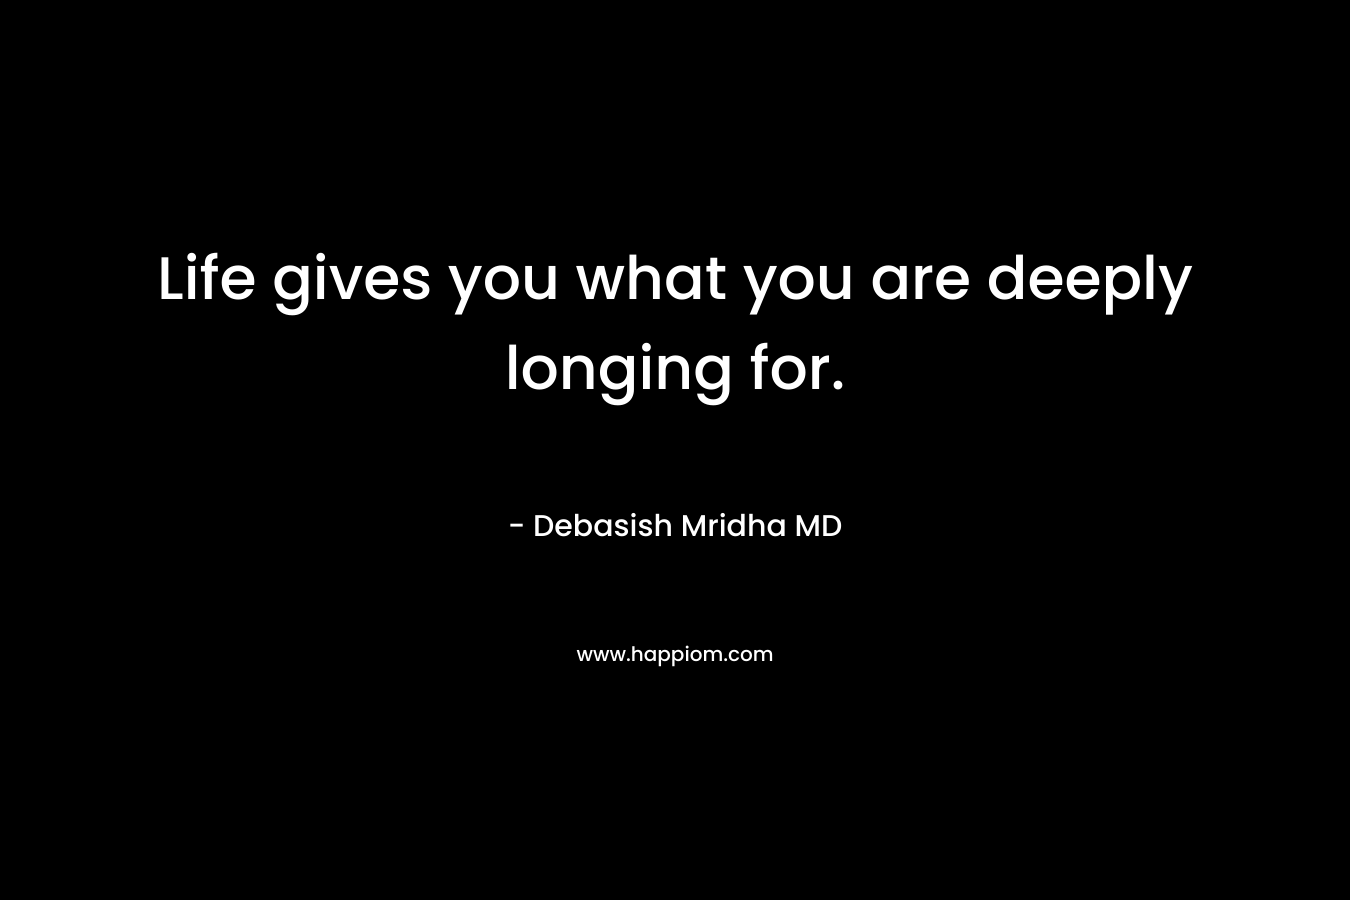 Life gives you what you are deeply longing for.